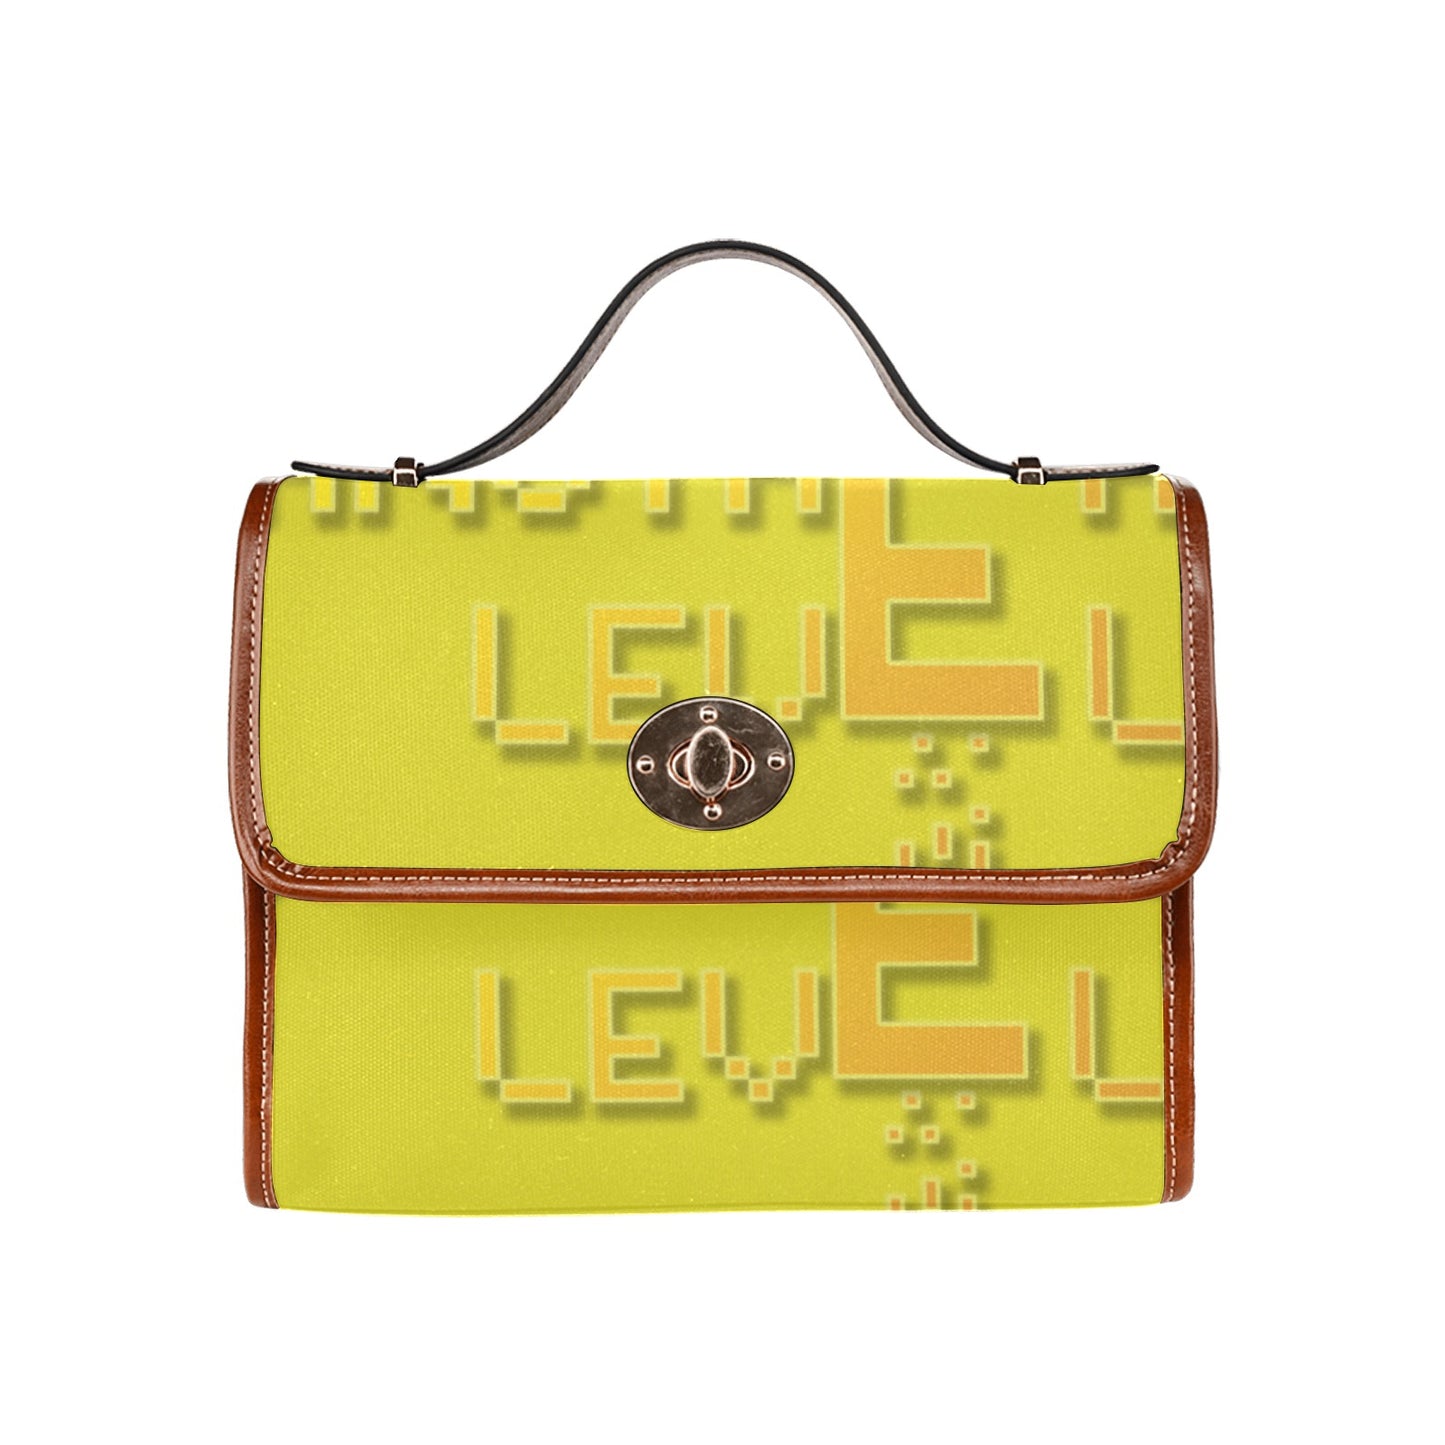 fz yellow levels handbag one size / fz - levels bag-yellow all over print waterproof canvas bag(model1641)(brown strap)